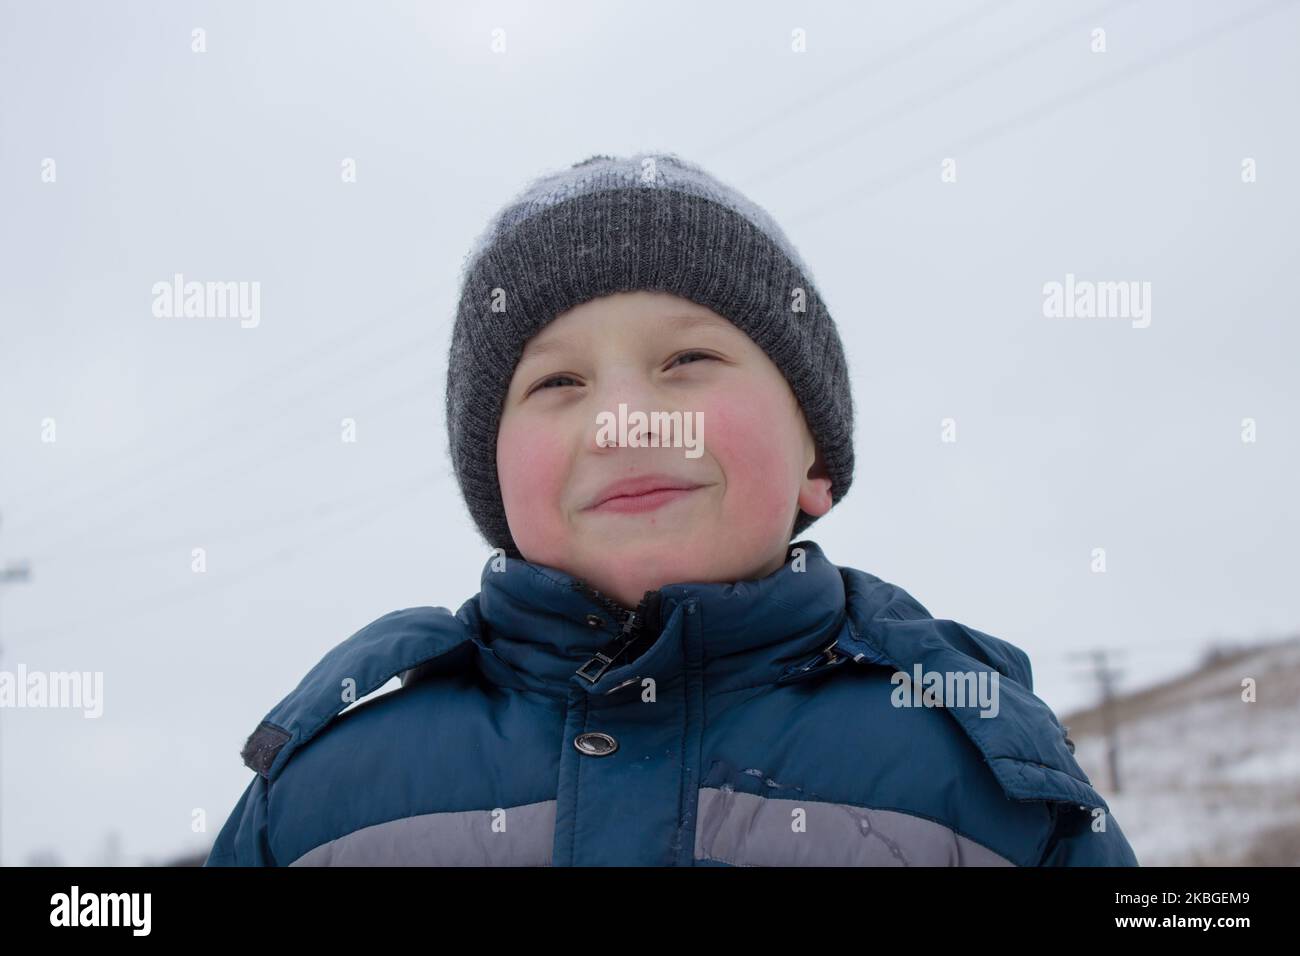 portrait of a little boy in winter clothes Stock Photo